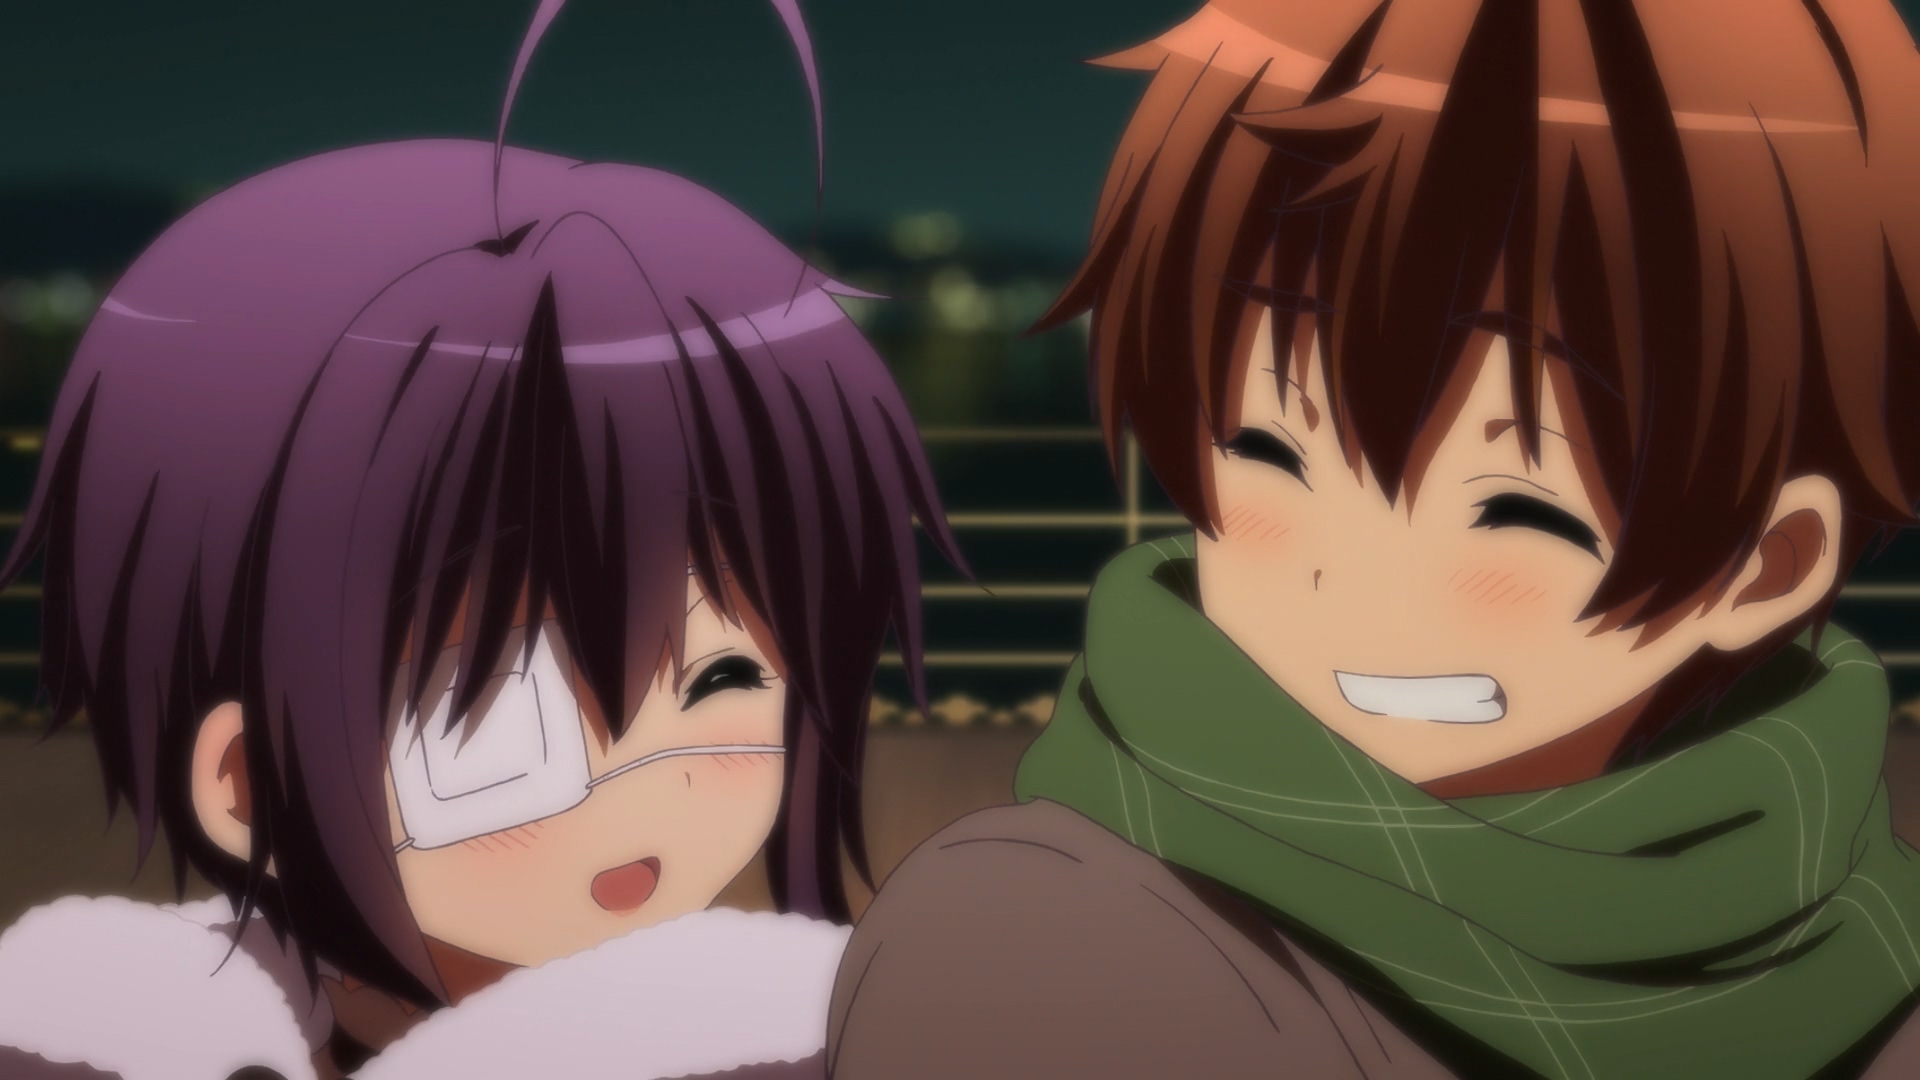 10. Love, Chunibyo & Other Delusions - wide 2